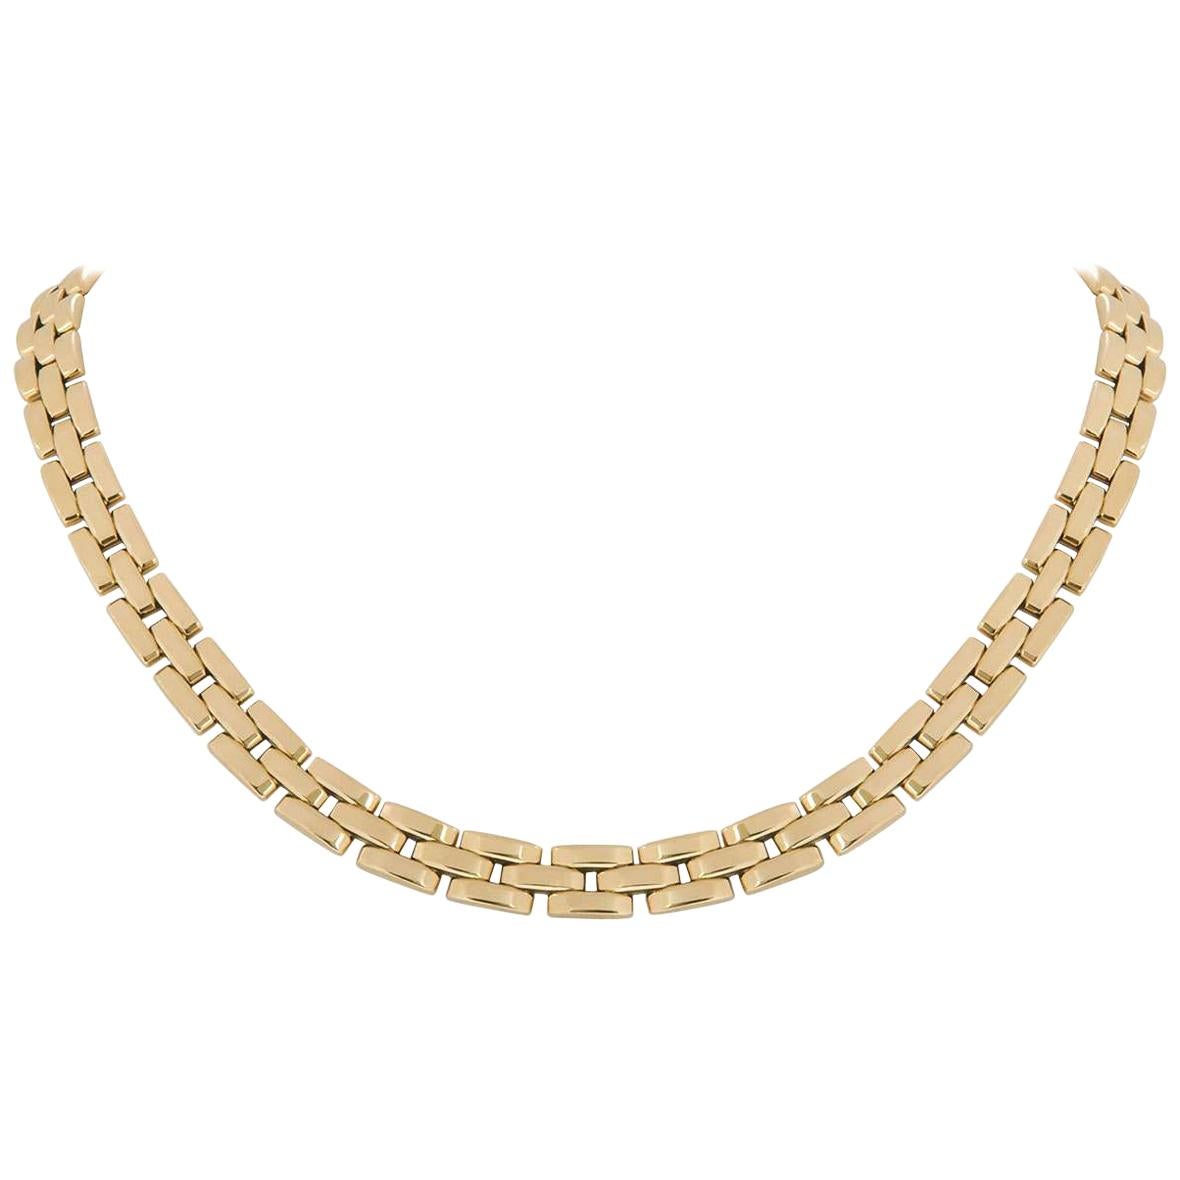 Cartier Yellow Gold Panther Maillon Necklace